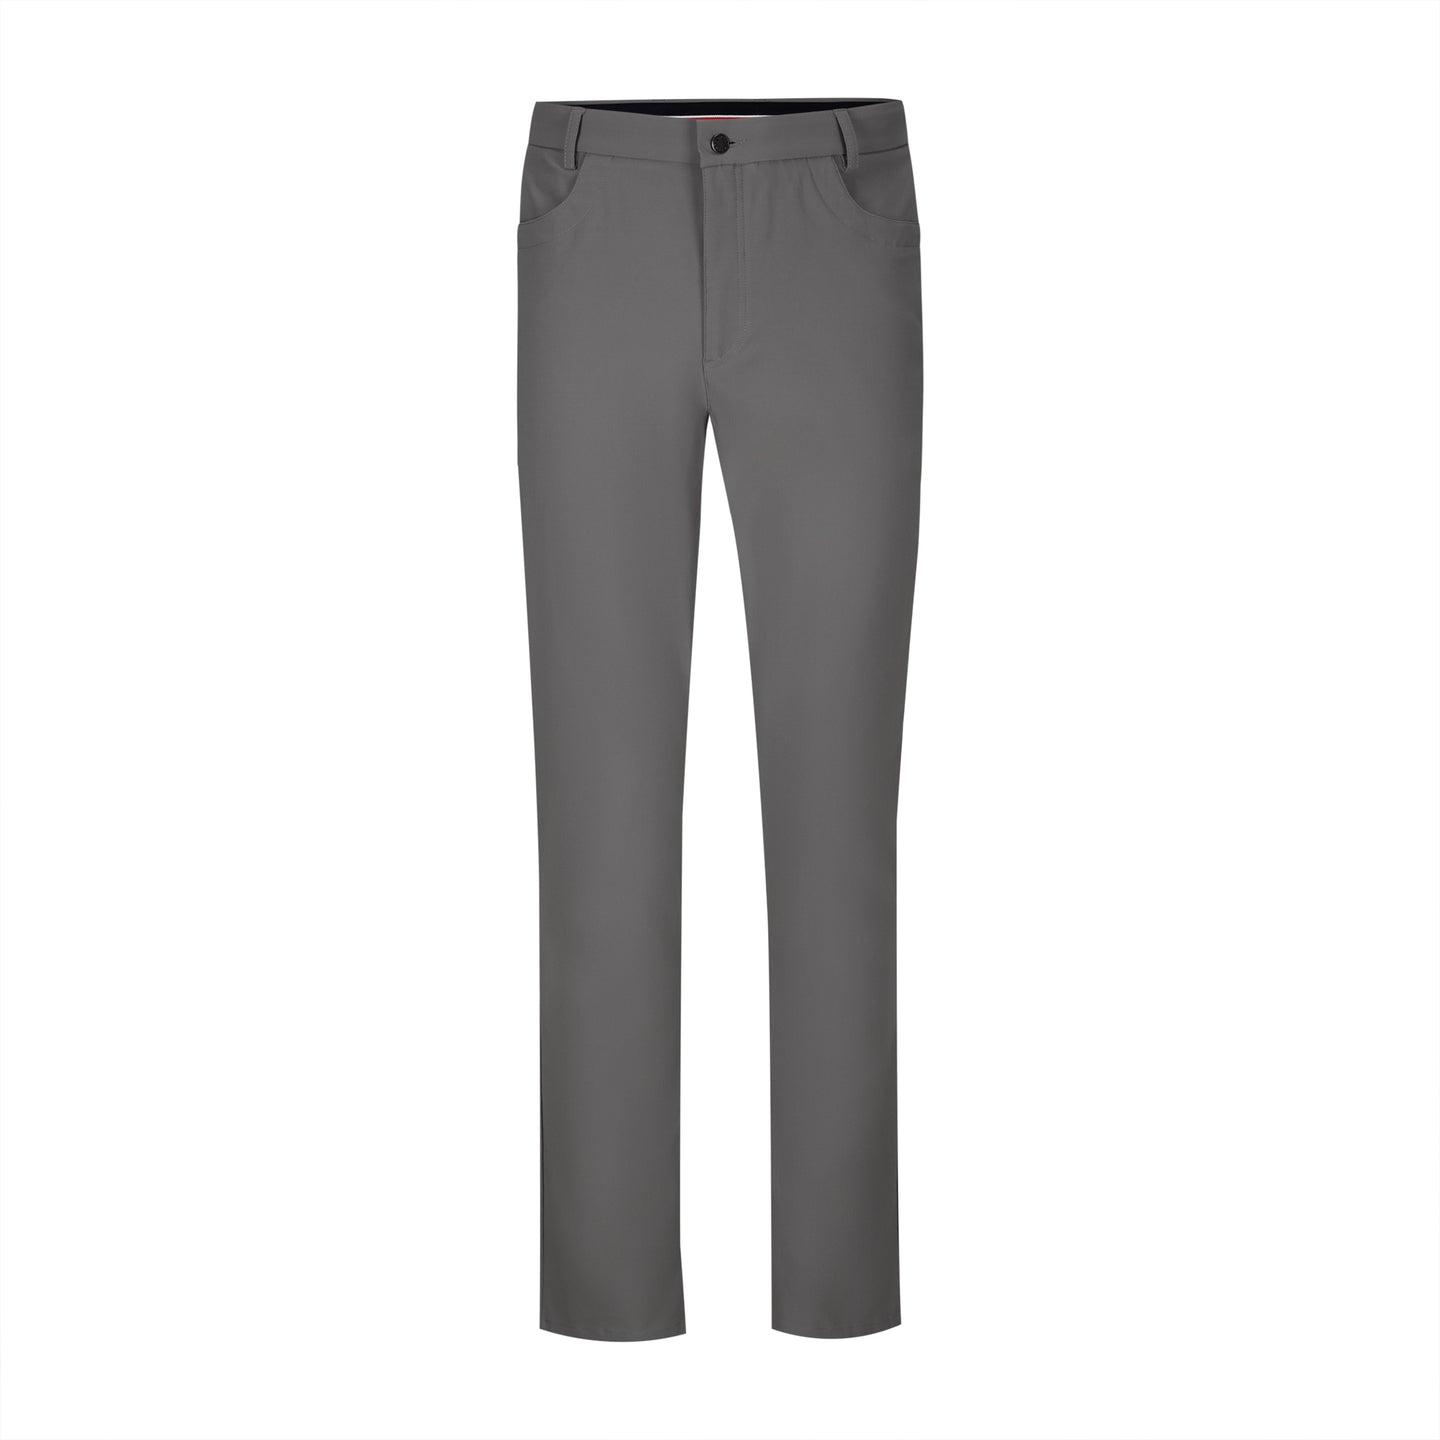 The Very Mens Pant